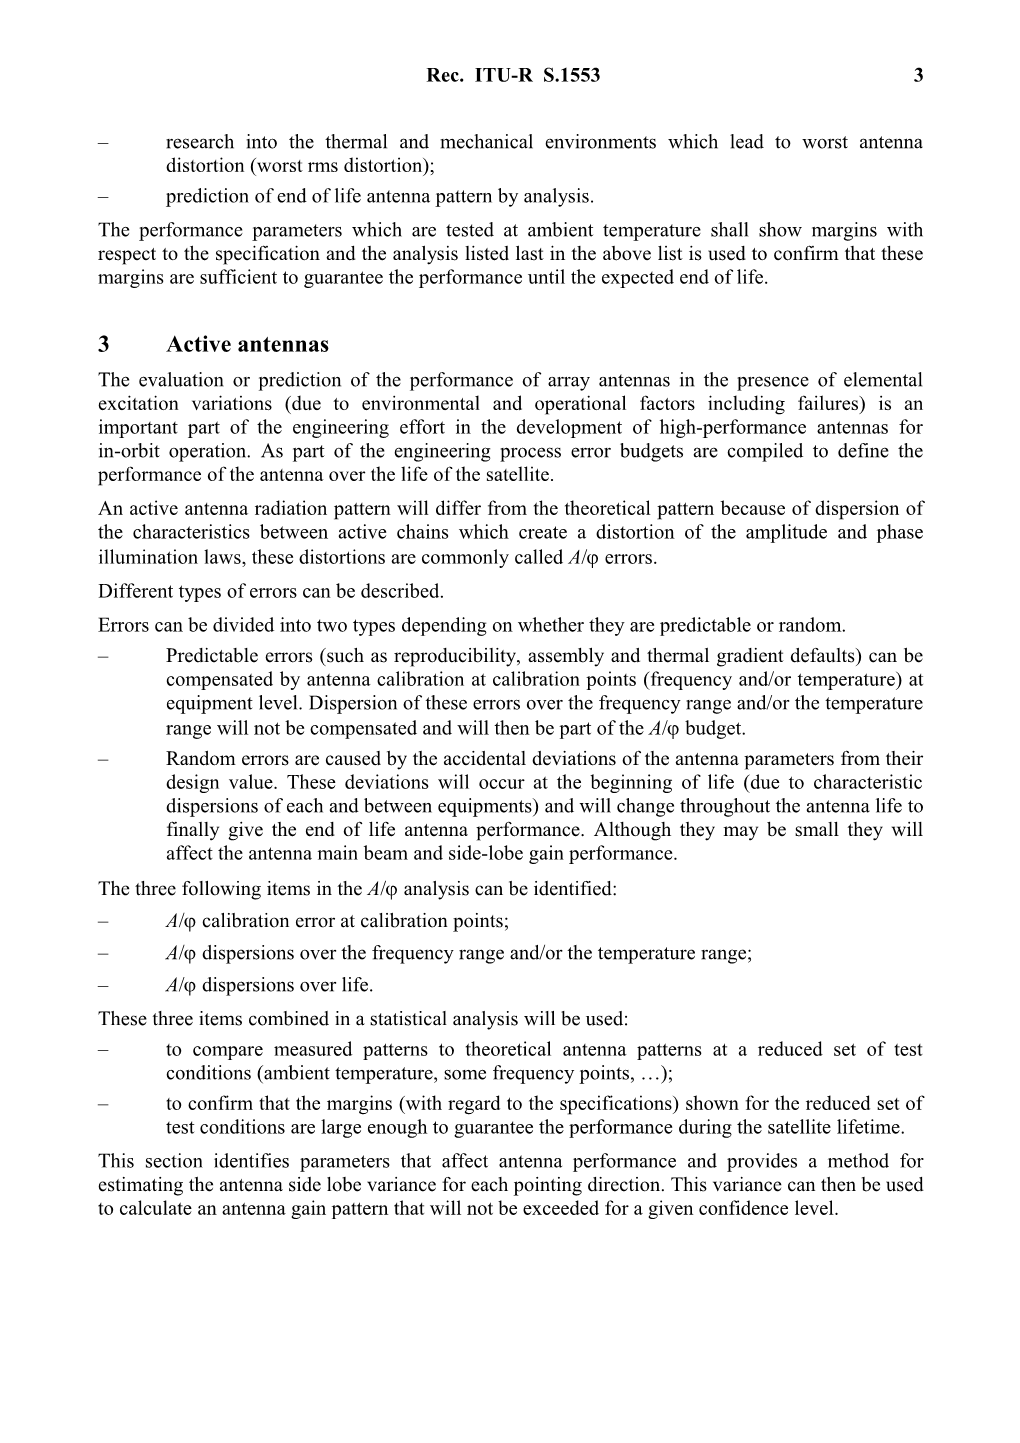 RECOMMENDATION ITU-R S.1553 - a Possible Method to Account for Environmental and Other